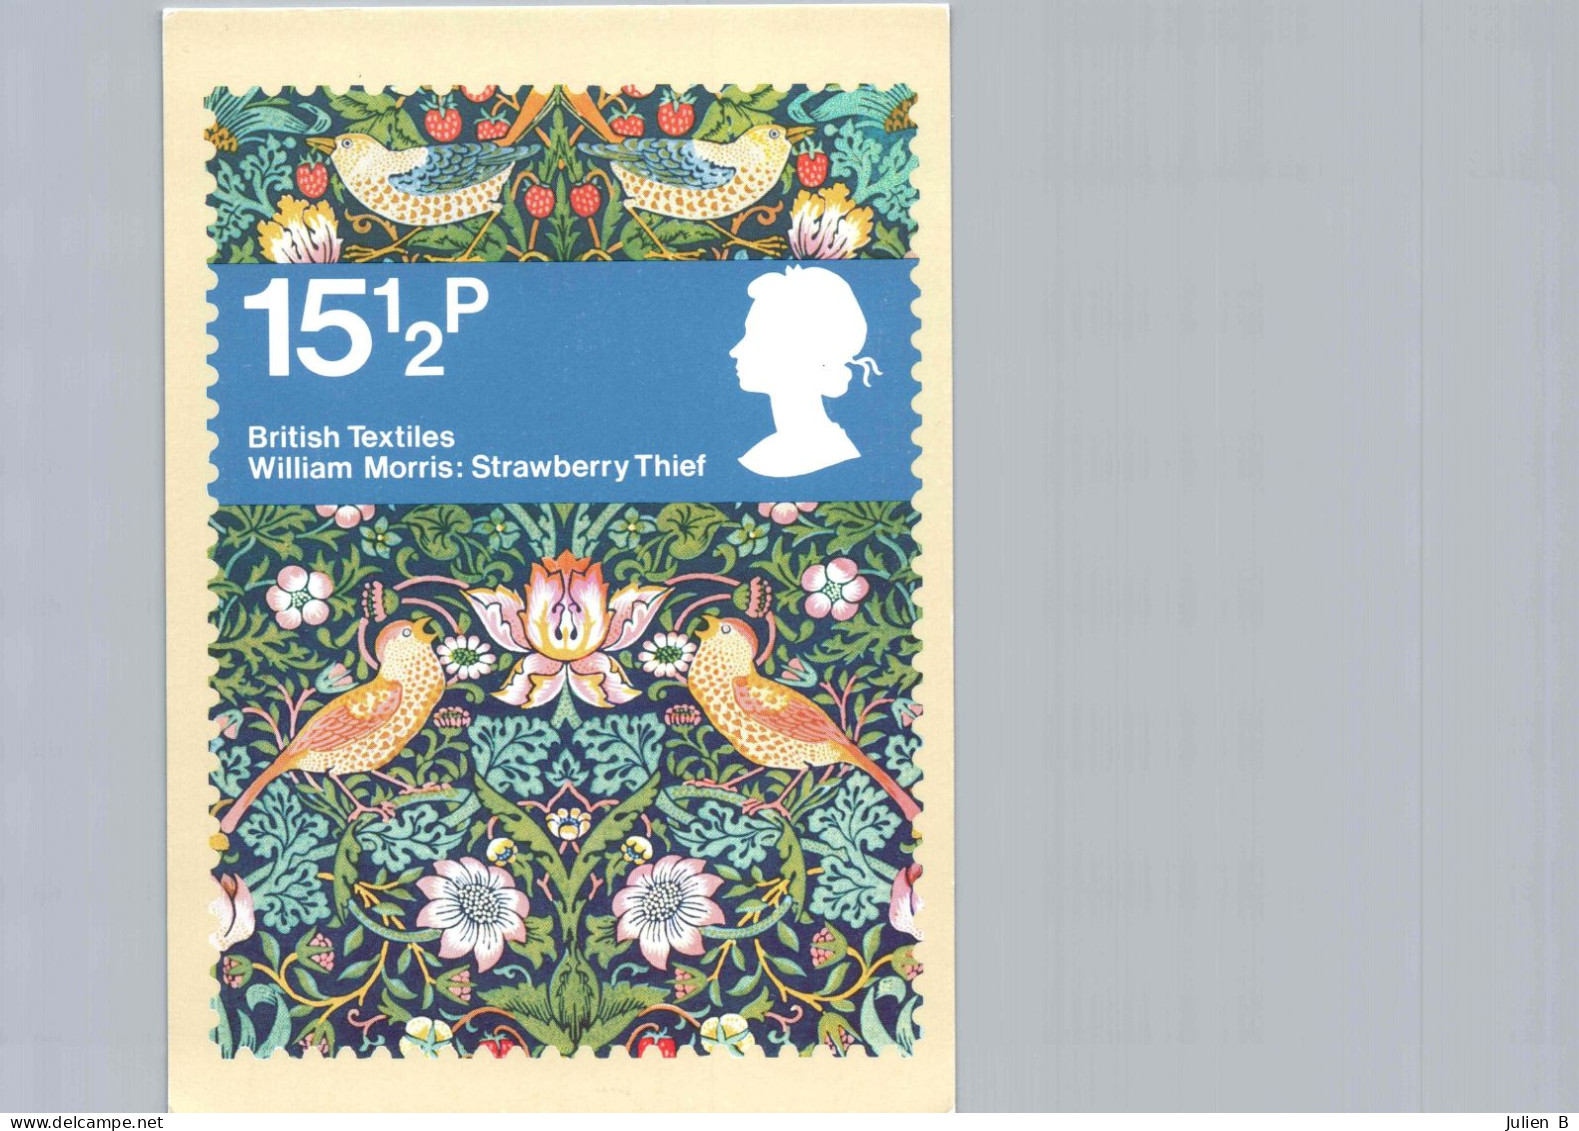 15p, British Textiles, Designed By Peter Hatch, 23 July 1982 - Stamps (pictures)